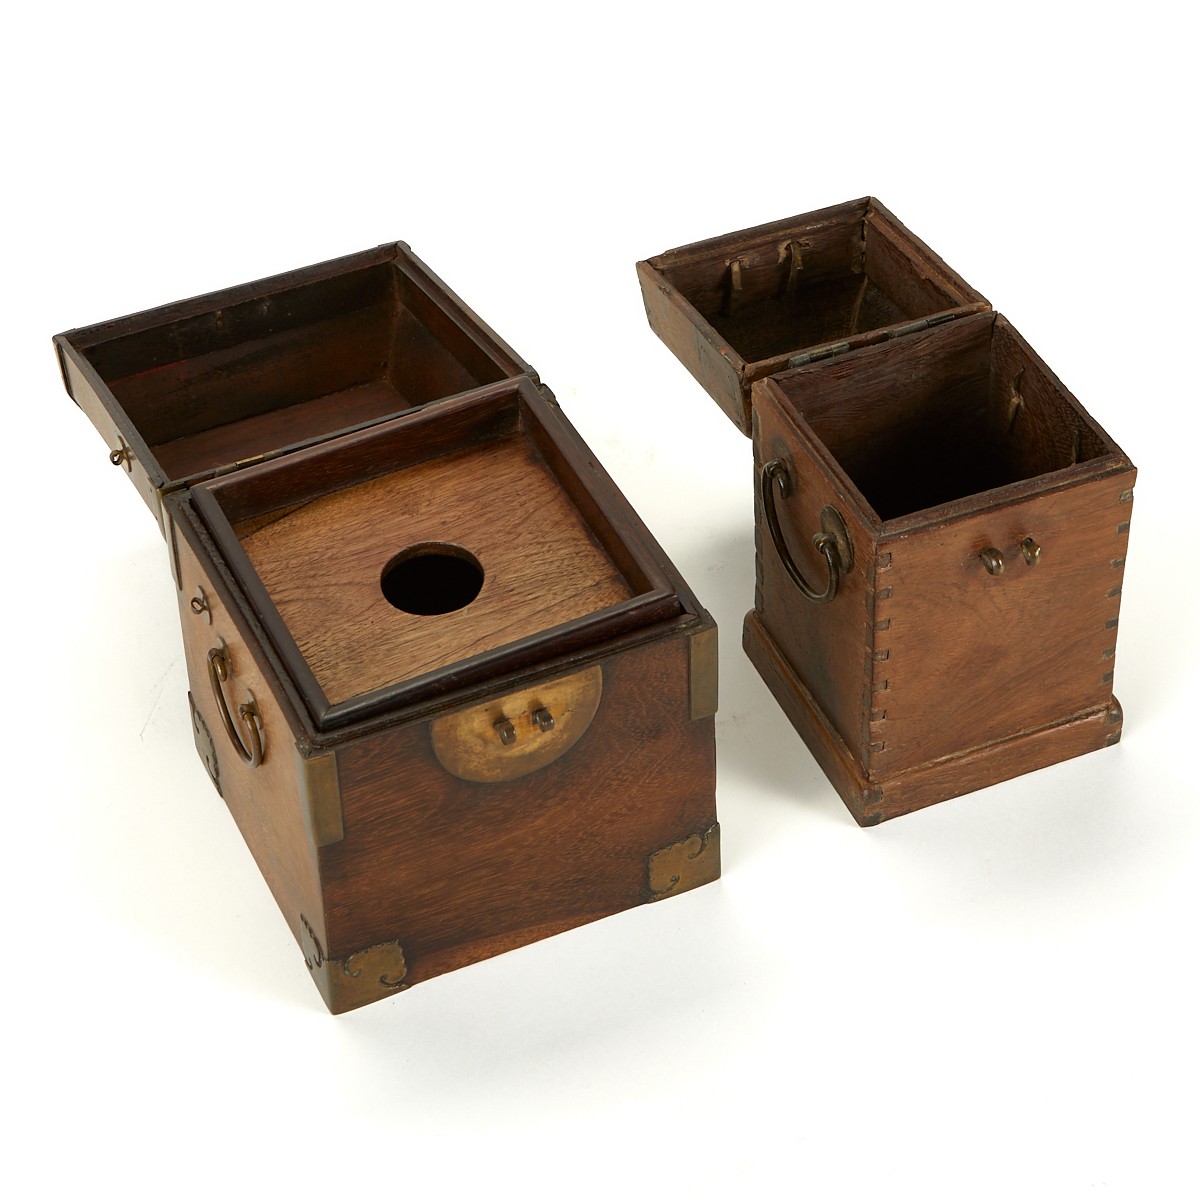 Pr: Chinese Wooden Boxes - Image 5 of 8